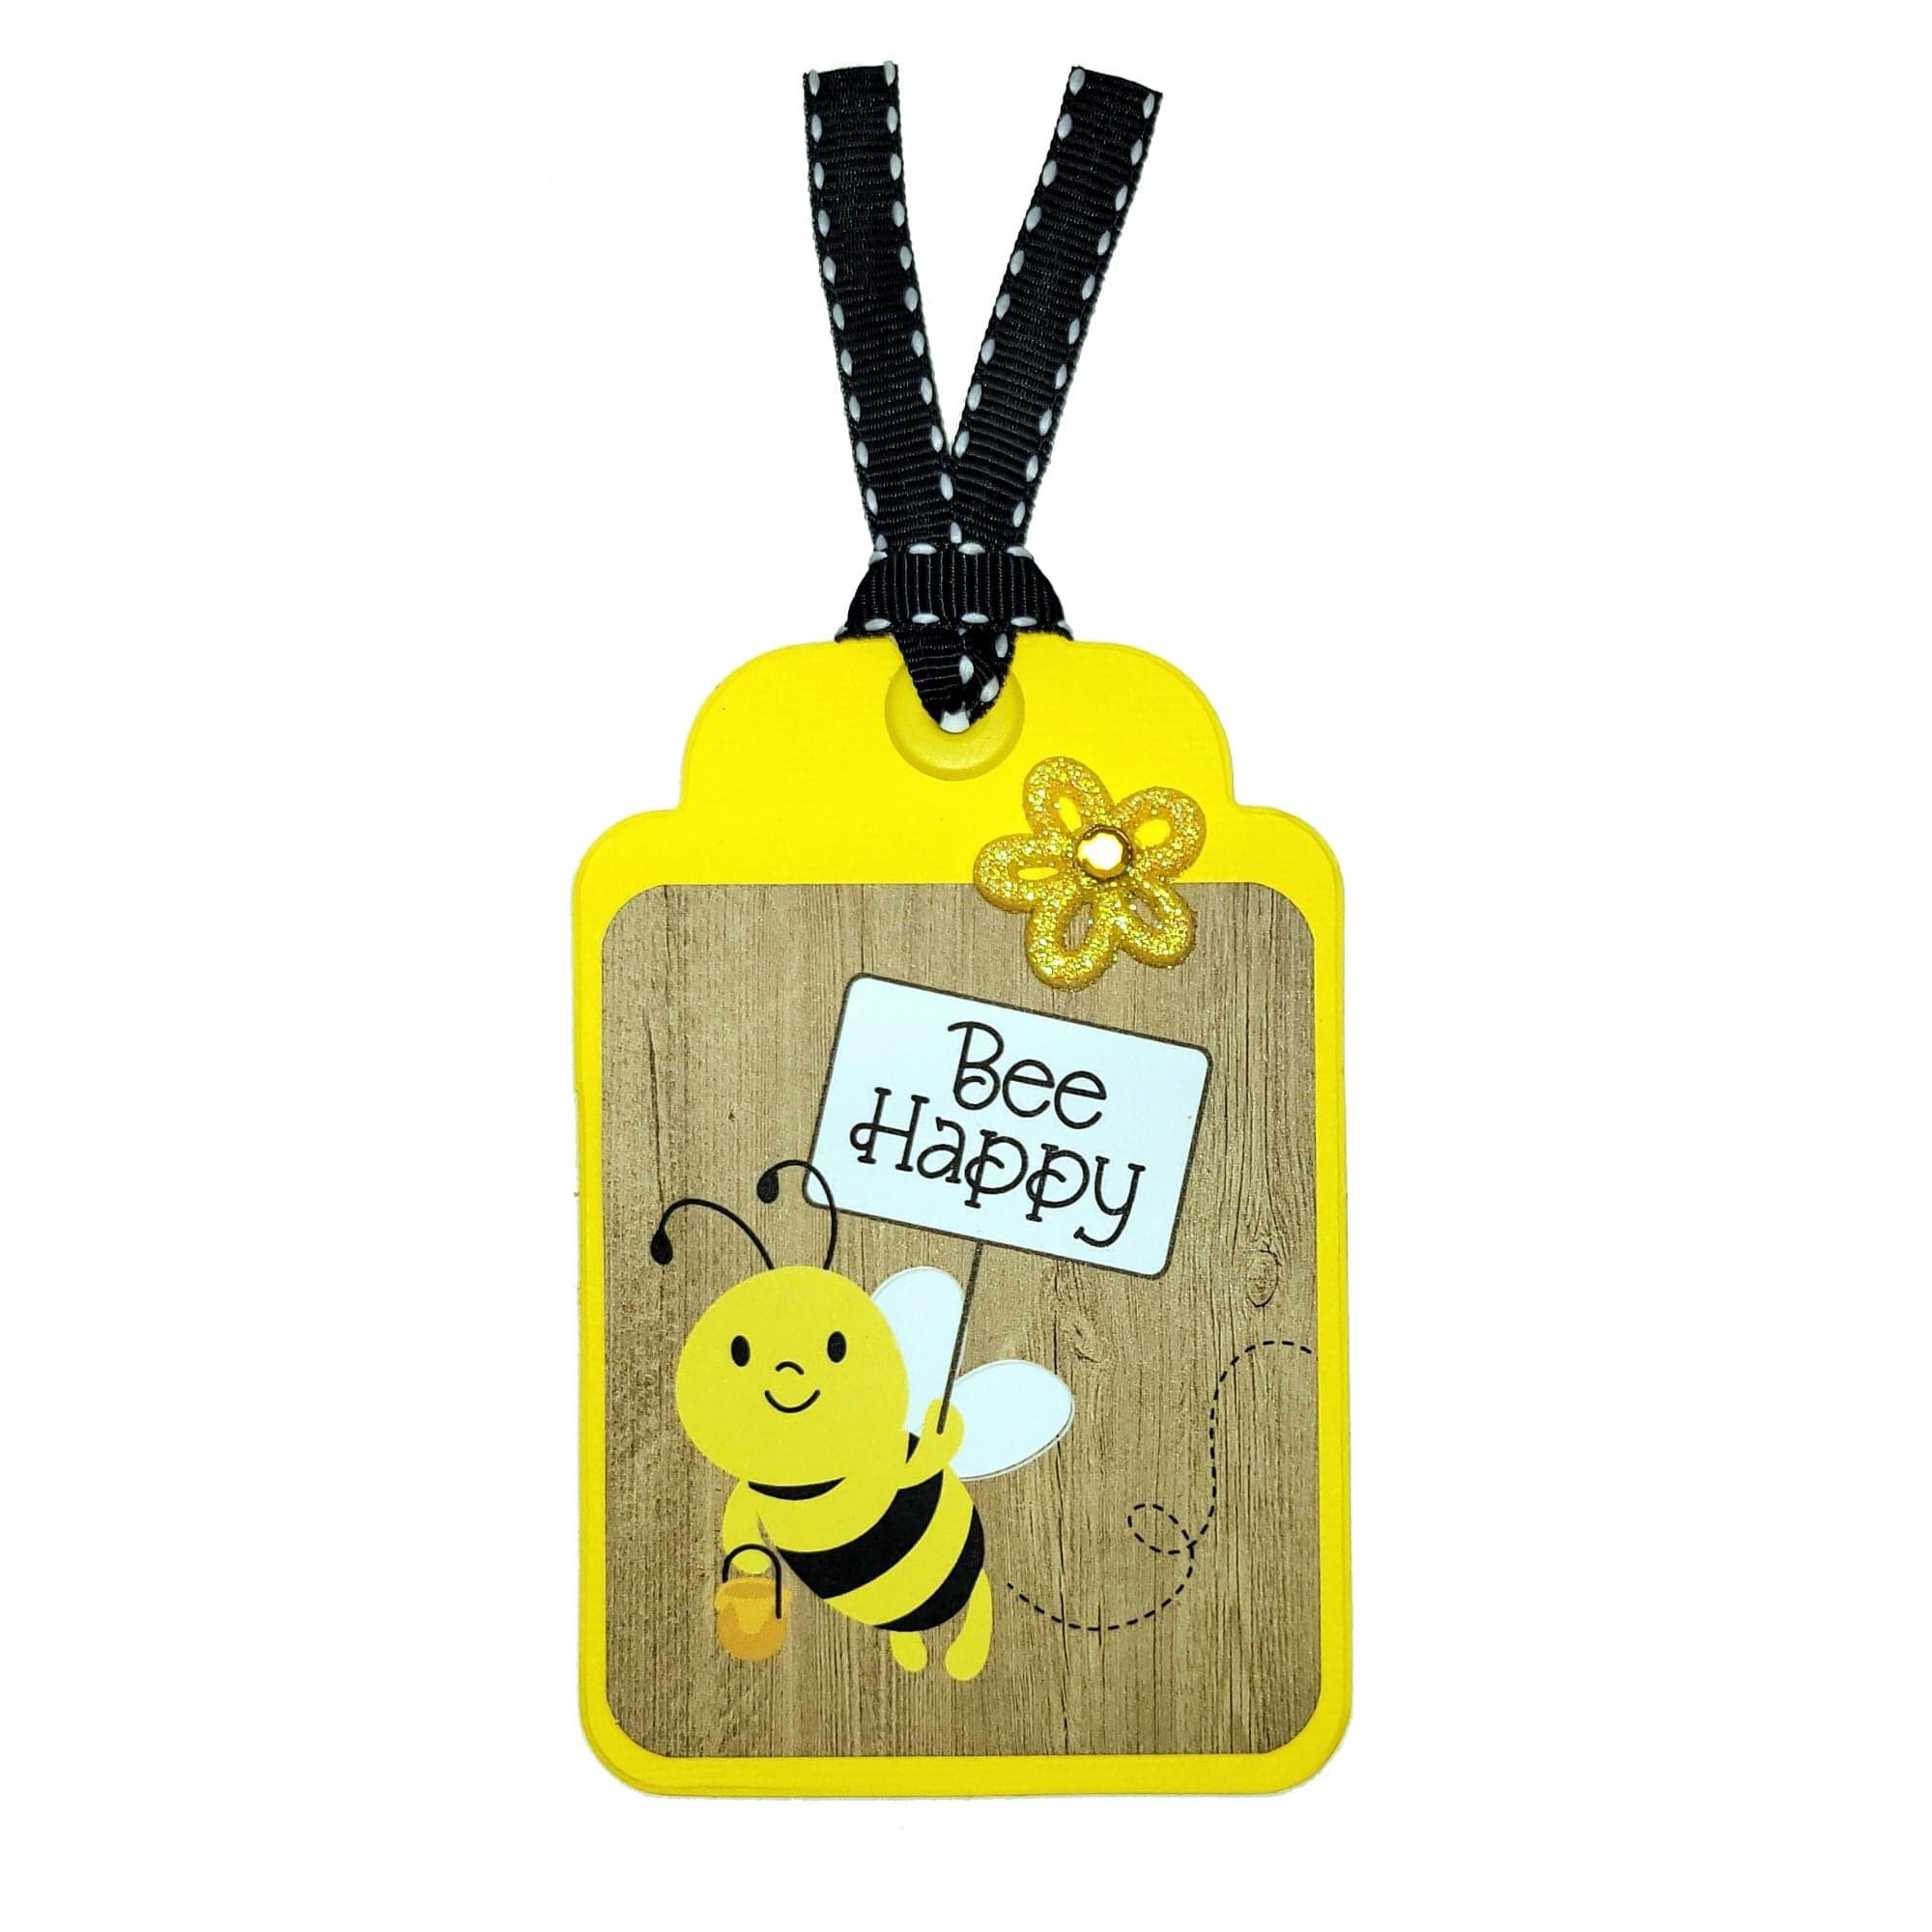 Honey Bee Collection Bee Happy 3 x 4 Scrapbook Tag Embellishment by SSC Designs